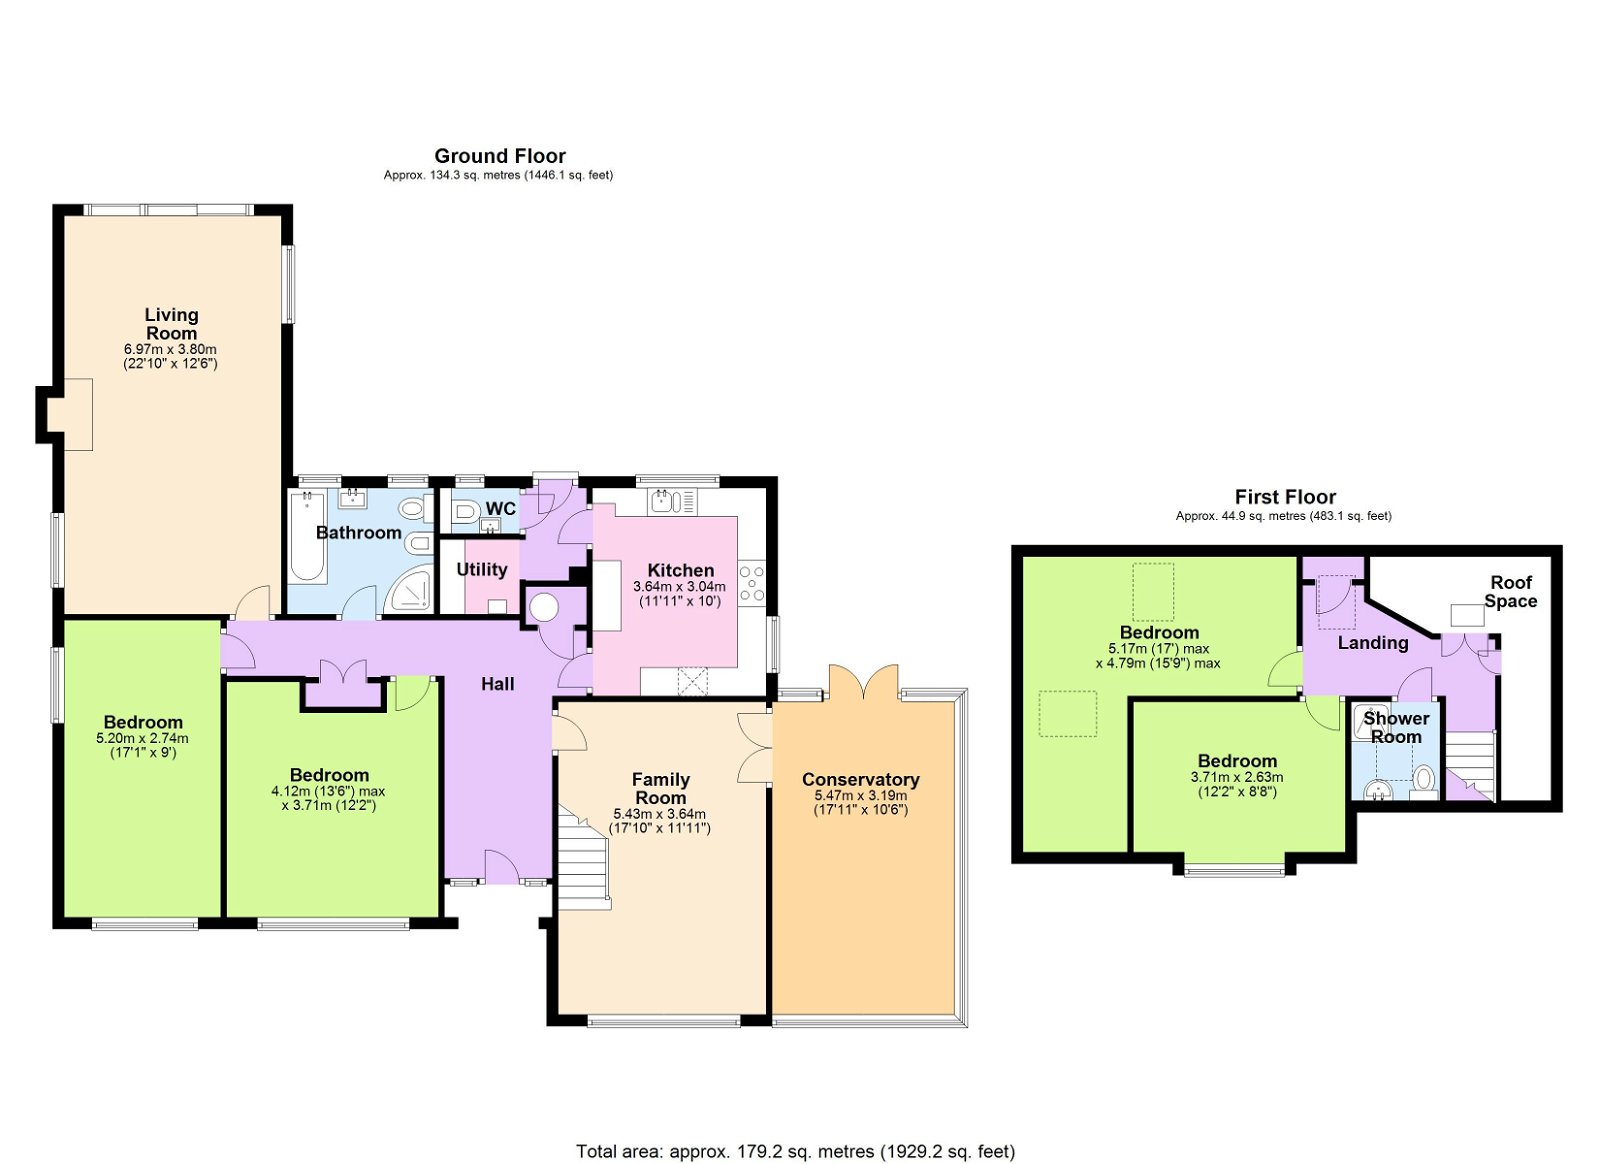 Floorplans For Ideally Located For Cranbrook School